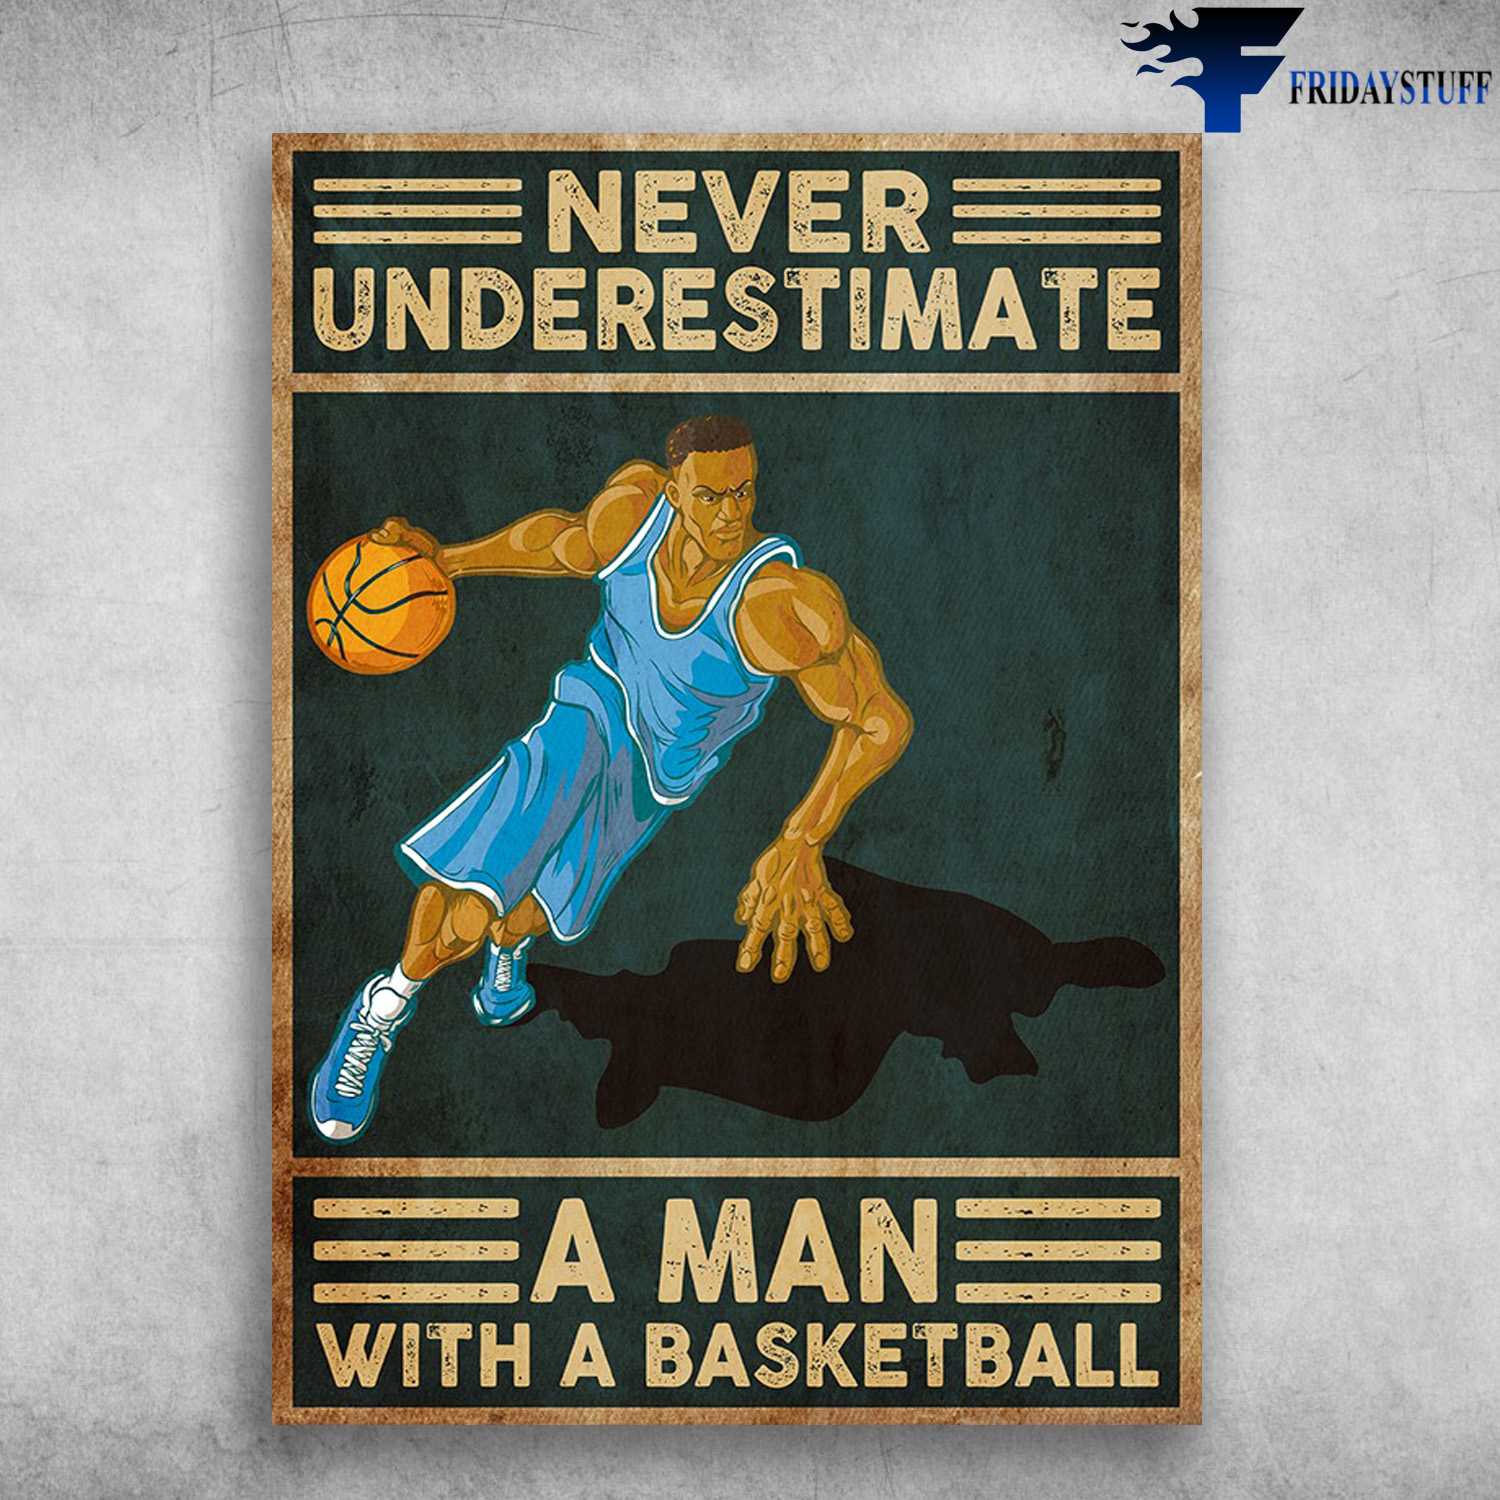 Basketball Player - Never Underestimate A Man, With A Basketball